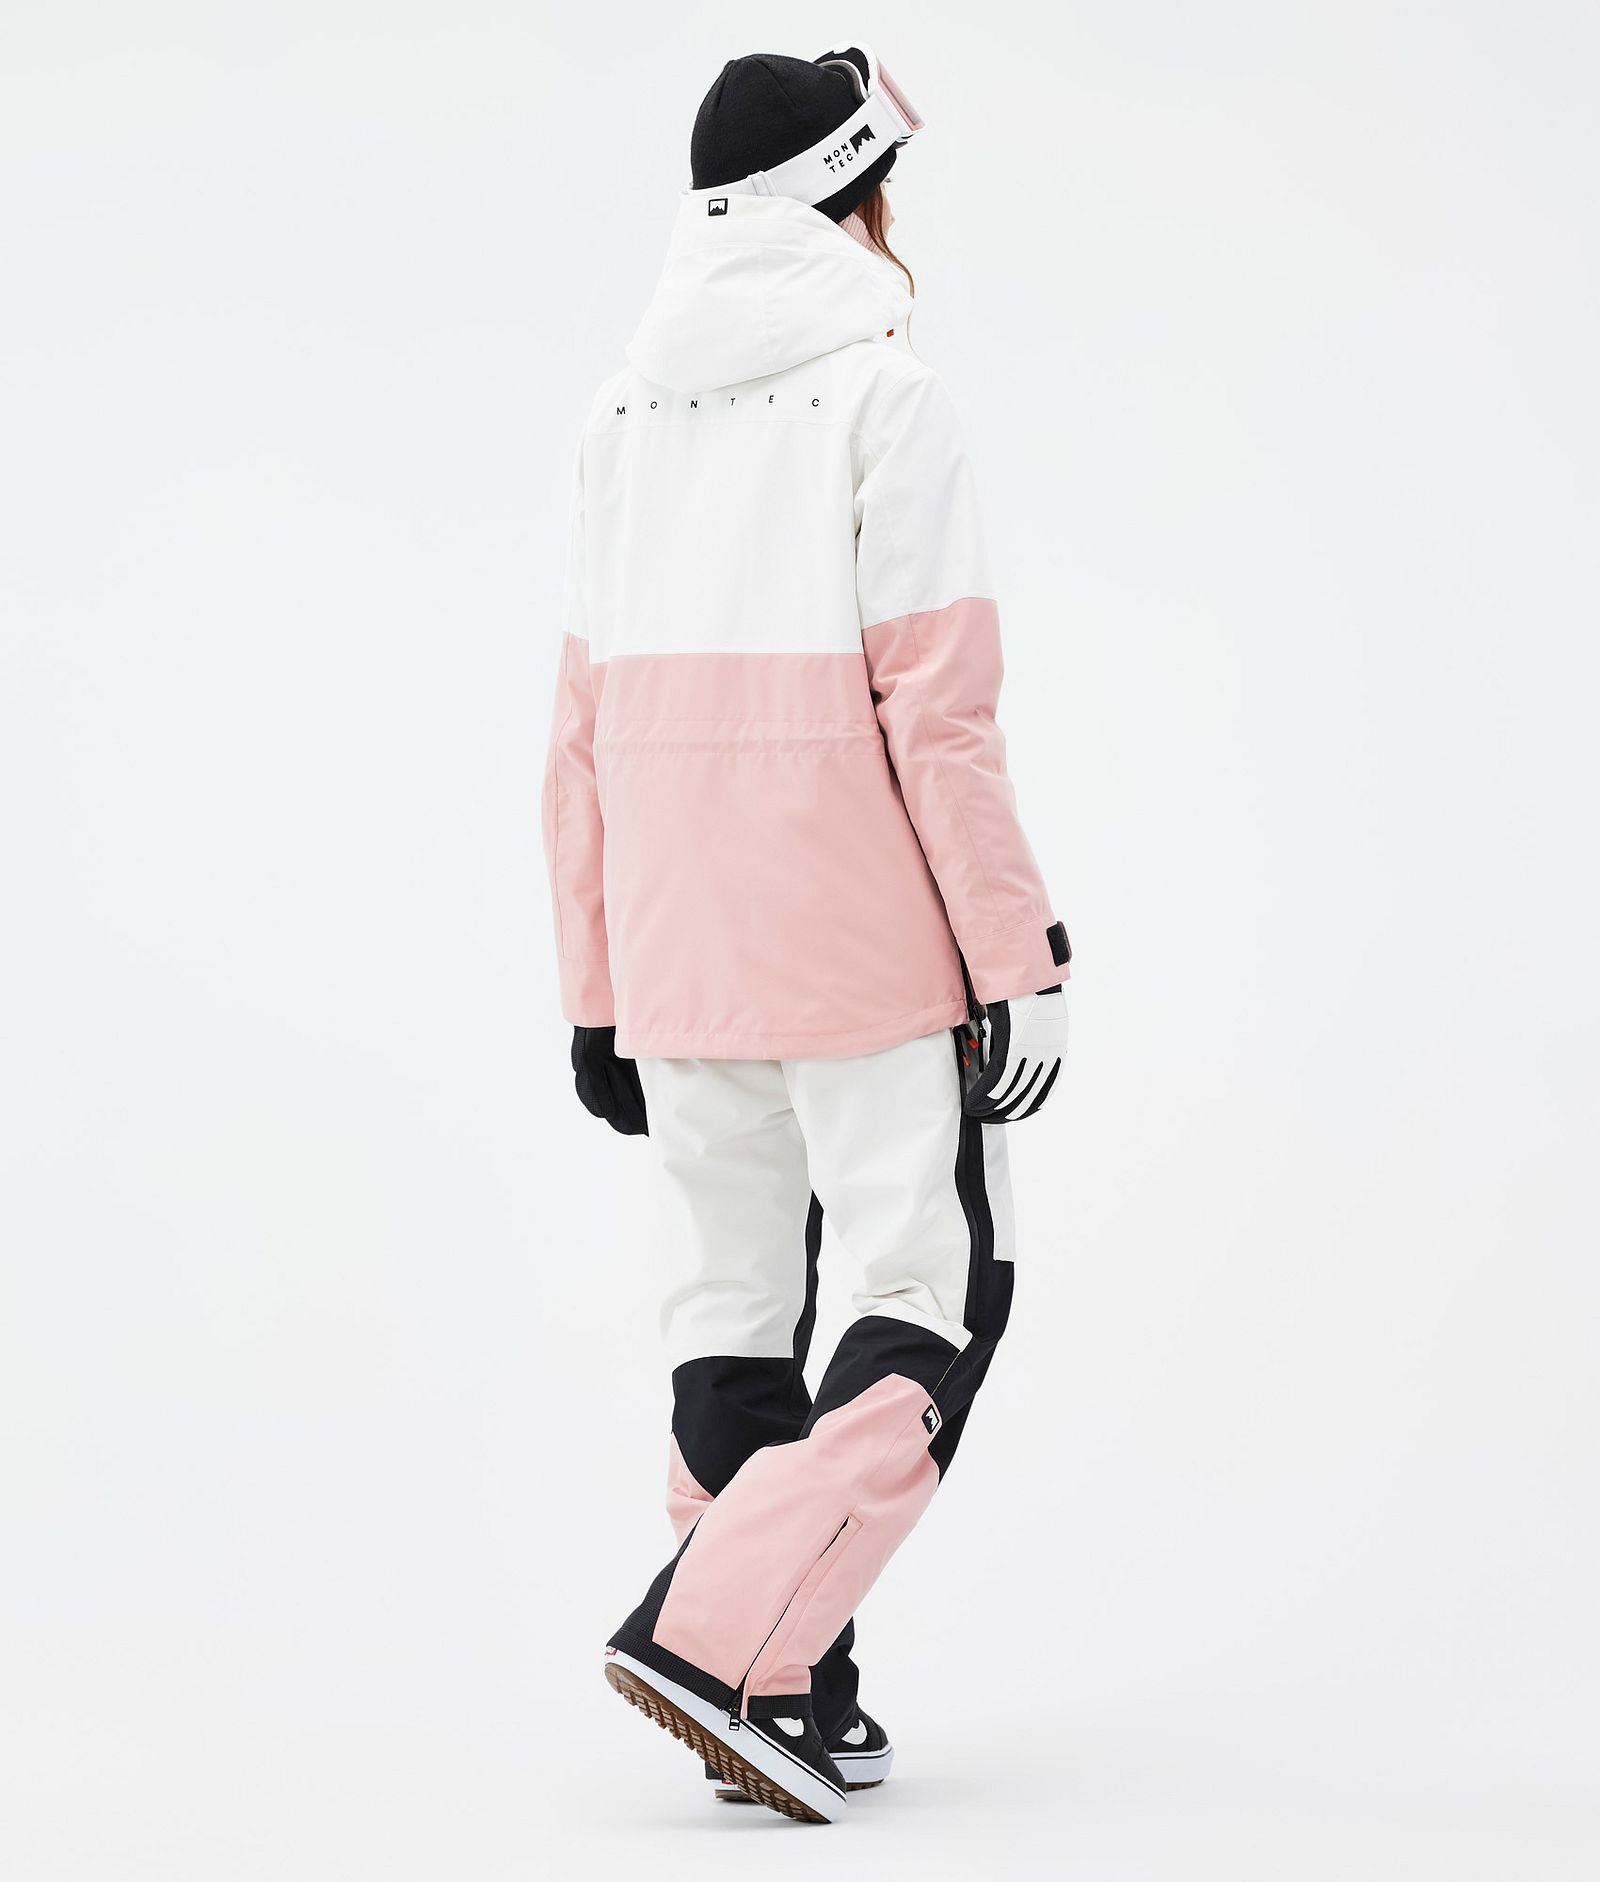 Dune W Snowboard Outfit Damen Old White/Black/Soft Pink, Image 2 of 2